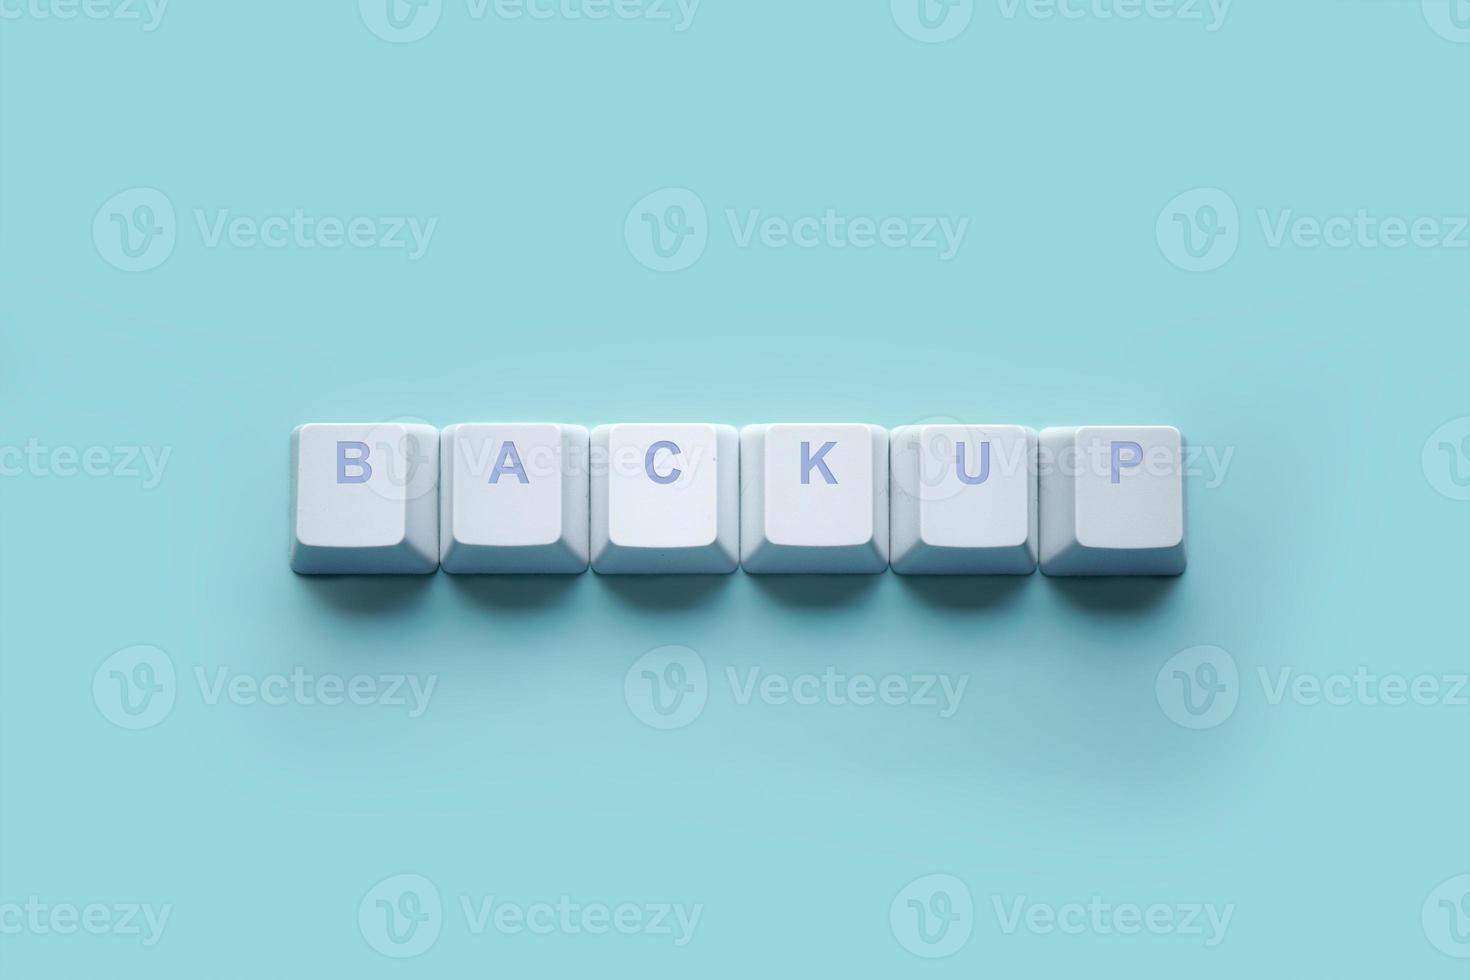 Word BACKUP written on computer keyboard keys isolated on a turquoise photo